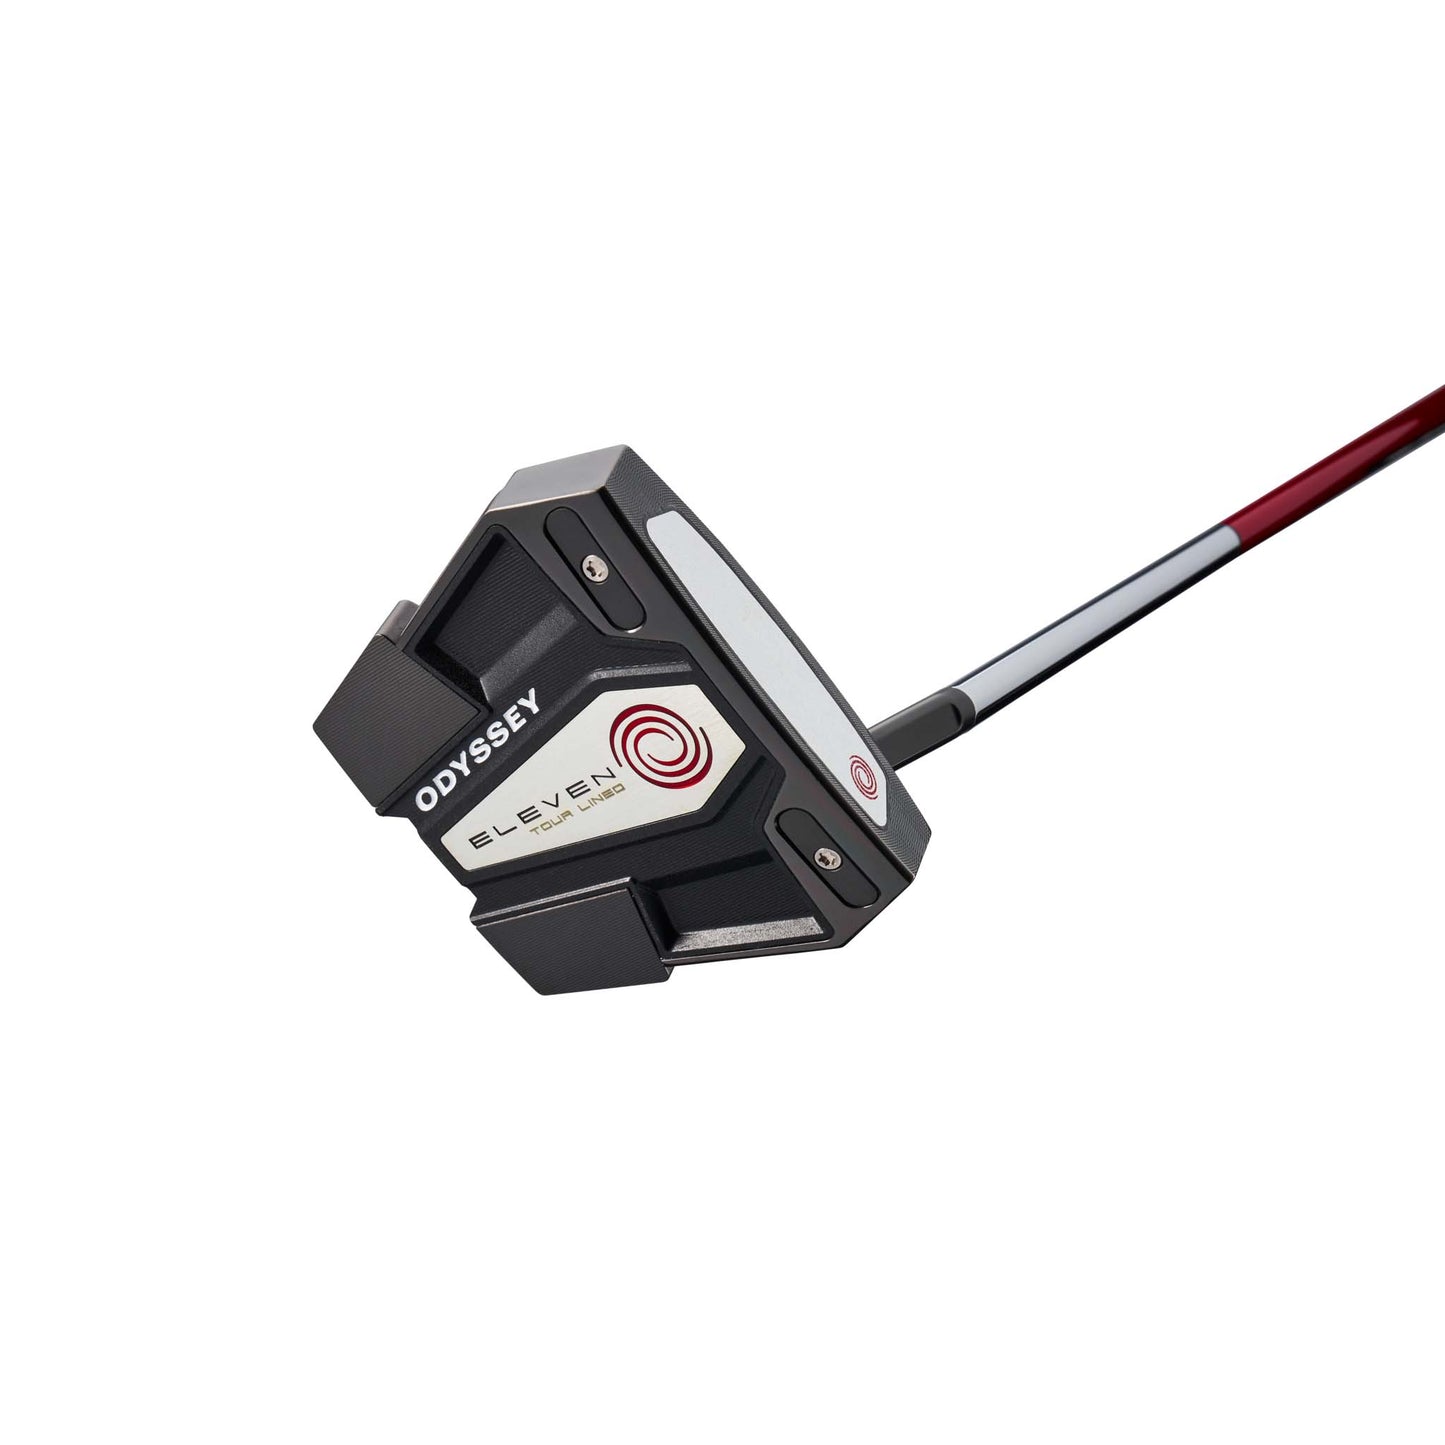 Odyssey Eleven Tour Lined S putteri